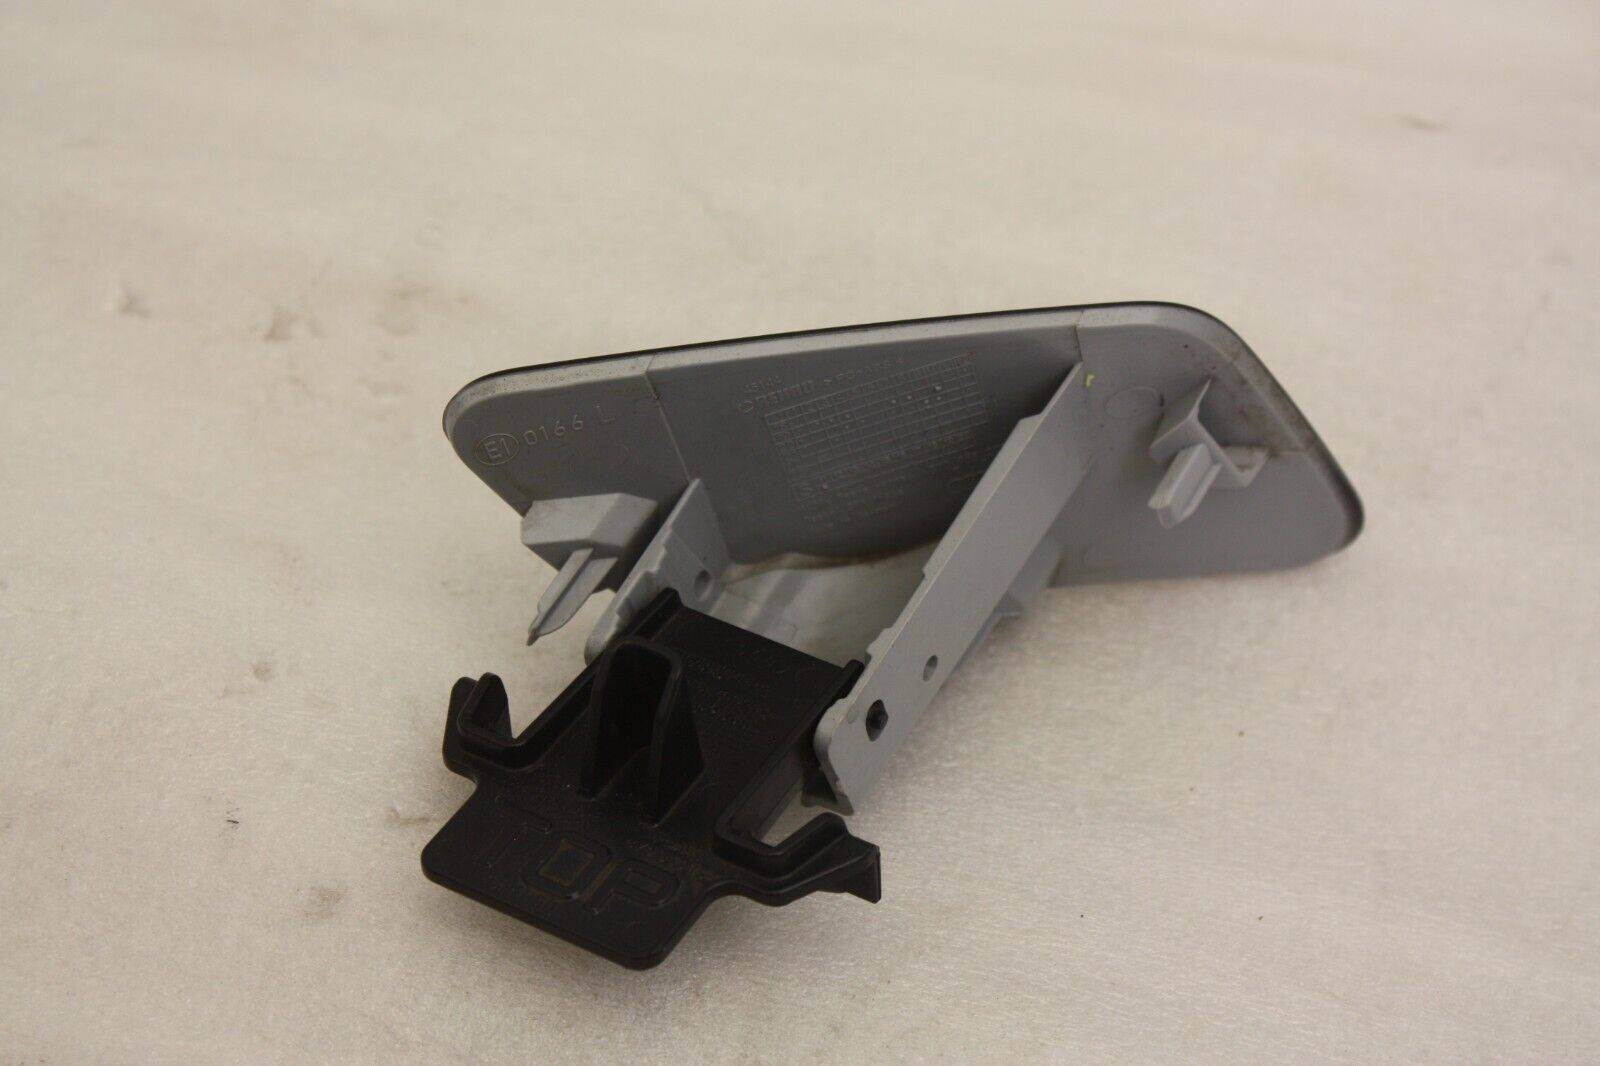 Audi-A3-Front-Bumper-Left-Side-Washer-Cover-8Y0955275-Genuine-176297416238-3